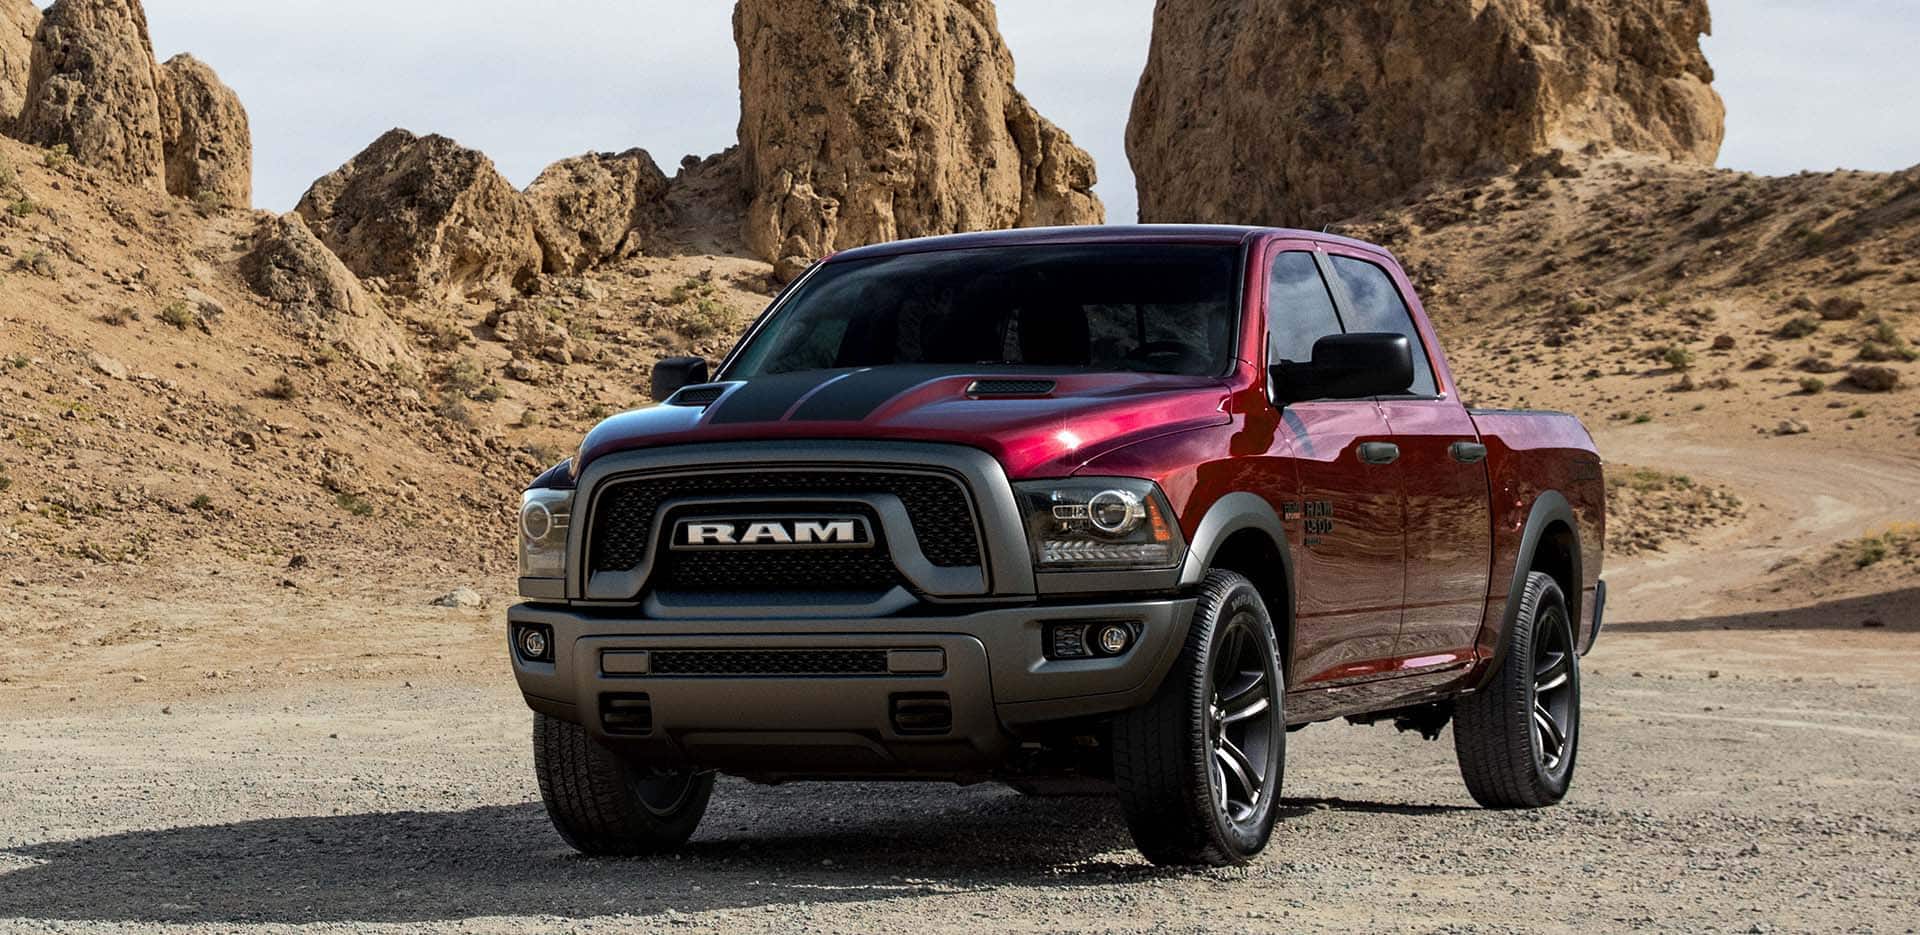 Display A red 2023 Ram 1500 Classic Warlock 4x4 Crew Cab parked on a twisting desert road with rocky outcroppings in the distance.